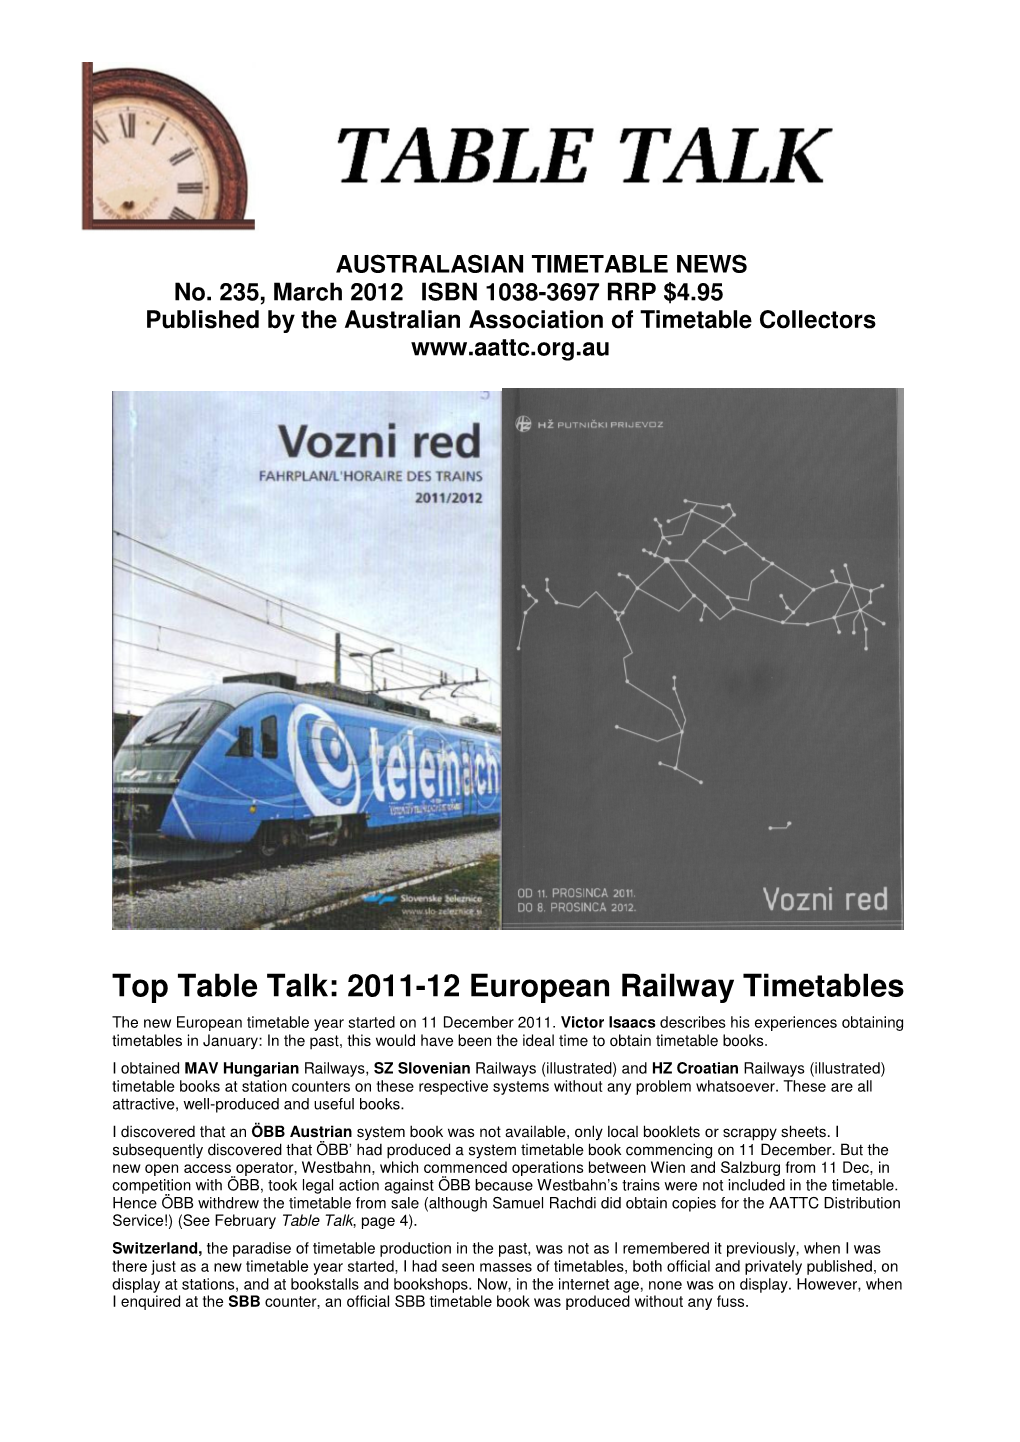 Top Table Talk: 2011-12 European Railway Timetables the New European Timetable Year Started on 11 December 2011